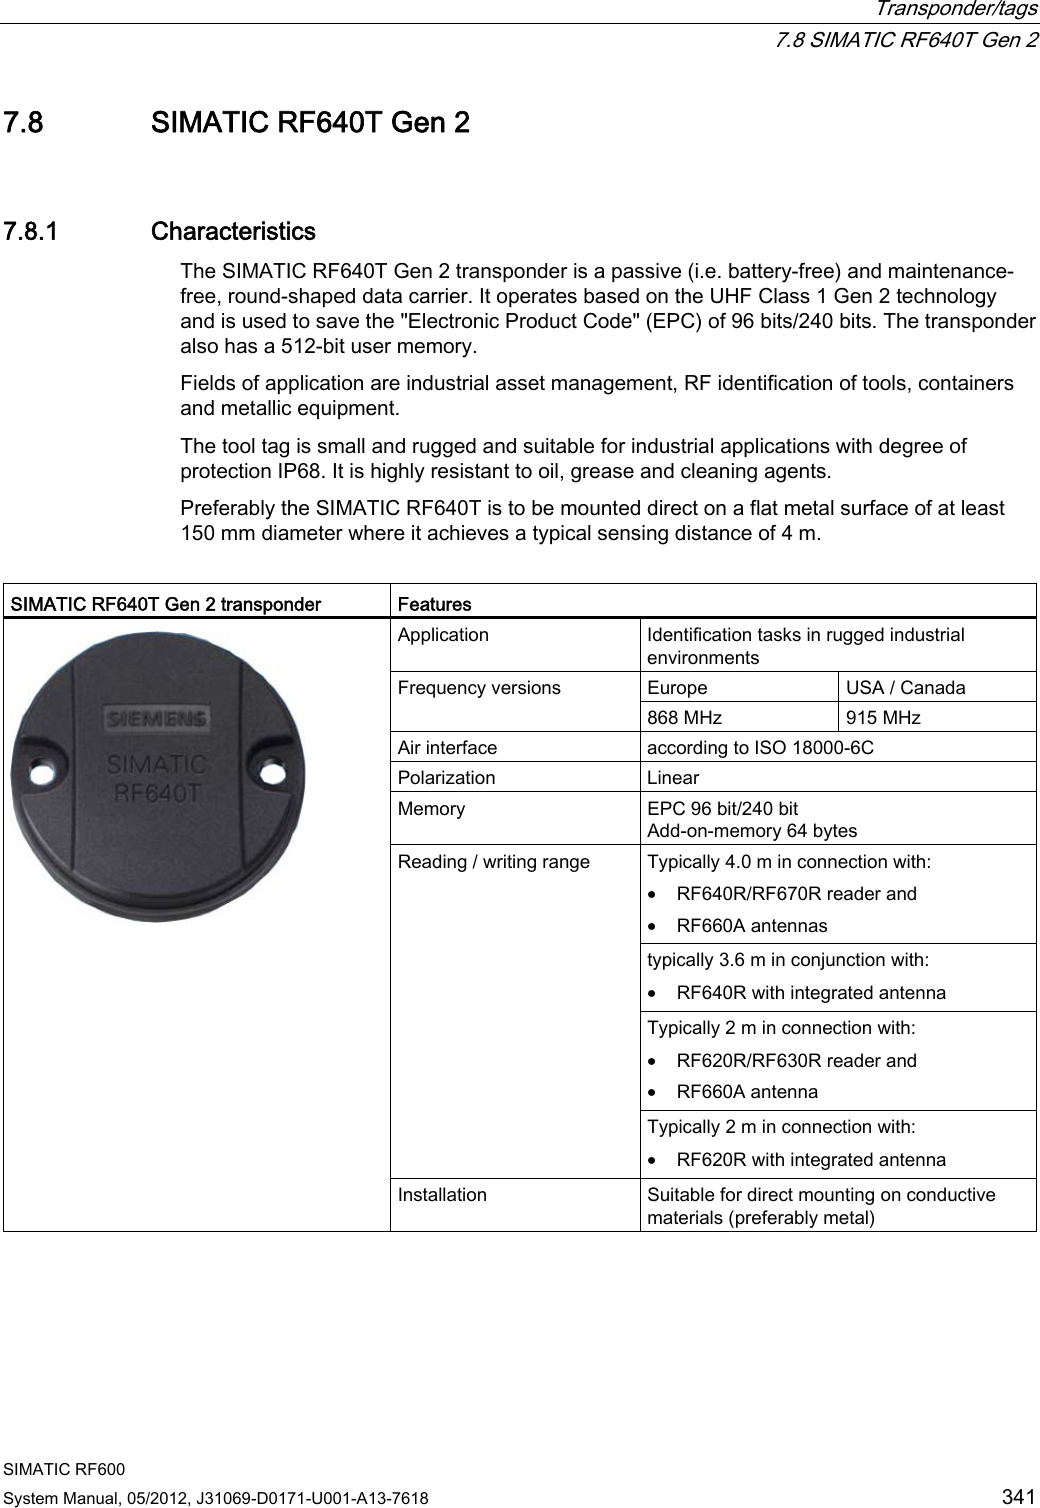  Transponder/tags  7.8 SIMATIC RF640T Gen 2 SIMATIC RF600 System Manual, 05/2012, J31069-D0171-U001-A13-7618  341 7.8 SIMATIC RF640T Gen 2 7.8.1 Characteristics The SIMATIC RF640T Gen 2 transponder is a passive (i.e. battery-free) and maintenance-free, round-shaped data carrier. It operates based on the UHF Class 1 Gen 2 technology and is used to save the &quot;Electronic Product Code&quot; (EPC) of 96 bits/240 bits. The transponder also has a 512-bit user memory. Fields of application are industrial asset management, RF identification of tools, containers and metallic equipment.  The tool tag is small and rugged and suitable for industrial applications with degree of protection IP68. It is highly resistant to oil, grease and cleaning agents.  Preferably the SIMATIC RF640T is to be mounted direct on a flat metal surface of at least 150 mm diameter where it achieves a typical sensing distance of 4 m.  SIMATIC RF640T Gen 2 transponder  Features Application  Identification tasks in rugged industrial environments Europe  USA / Canada Frequency versions 868 MHz  915 MHz Air interface  according to ISO 18000-6C Polarization   Linear Memory  EPC 96 bit/240 bit Add-on-memory 64 bytes Typically 4.0 m in connection with: • RF640R/RF670R reader and • RF660A antennas typically 3.6 m in conjunction with: • RF640R with integrated antenna Typically 2 m in connection with: • RF620R/RF630R reader and • RF660A antenna Reading / writing range Typically 2 m in connection with: • RF620R with integrated antenna  Installation  Suitable for direct mounting on conductive materials (preferably metal) 